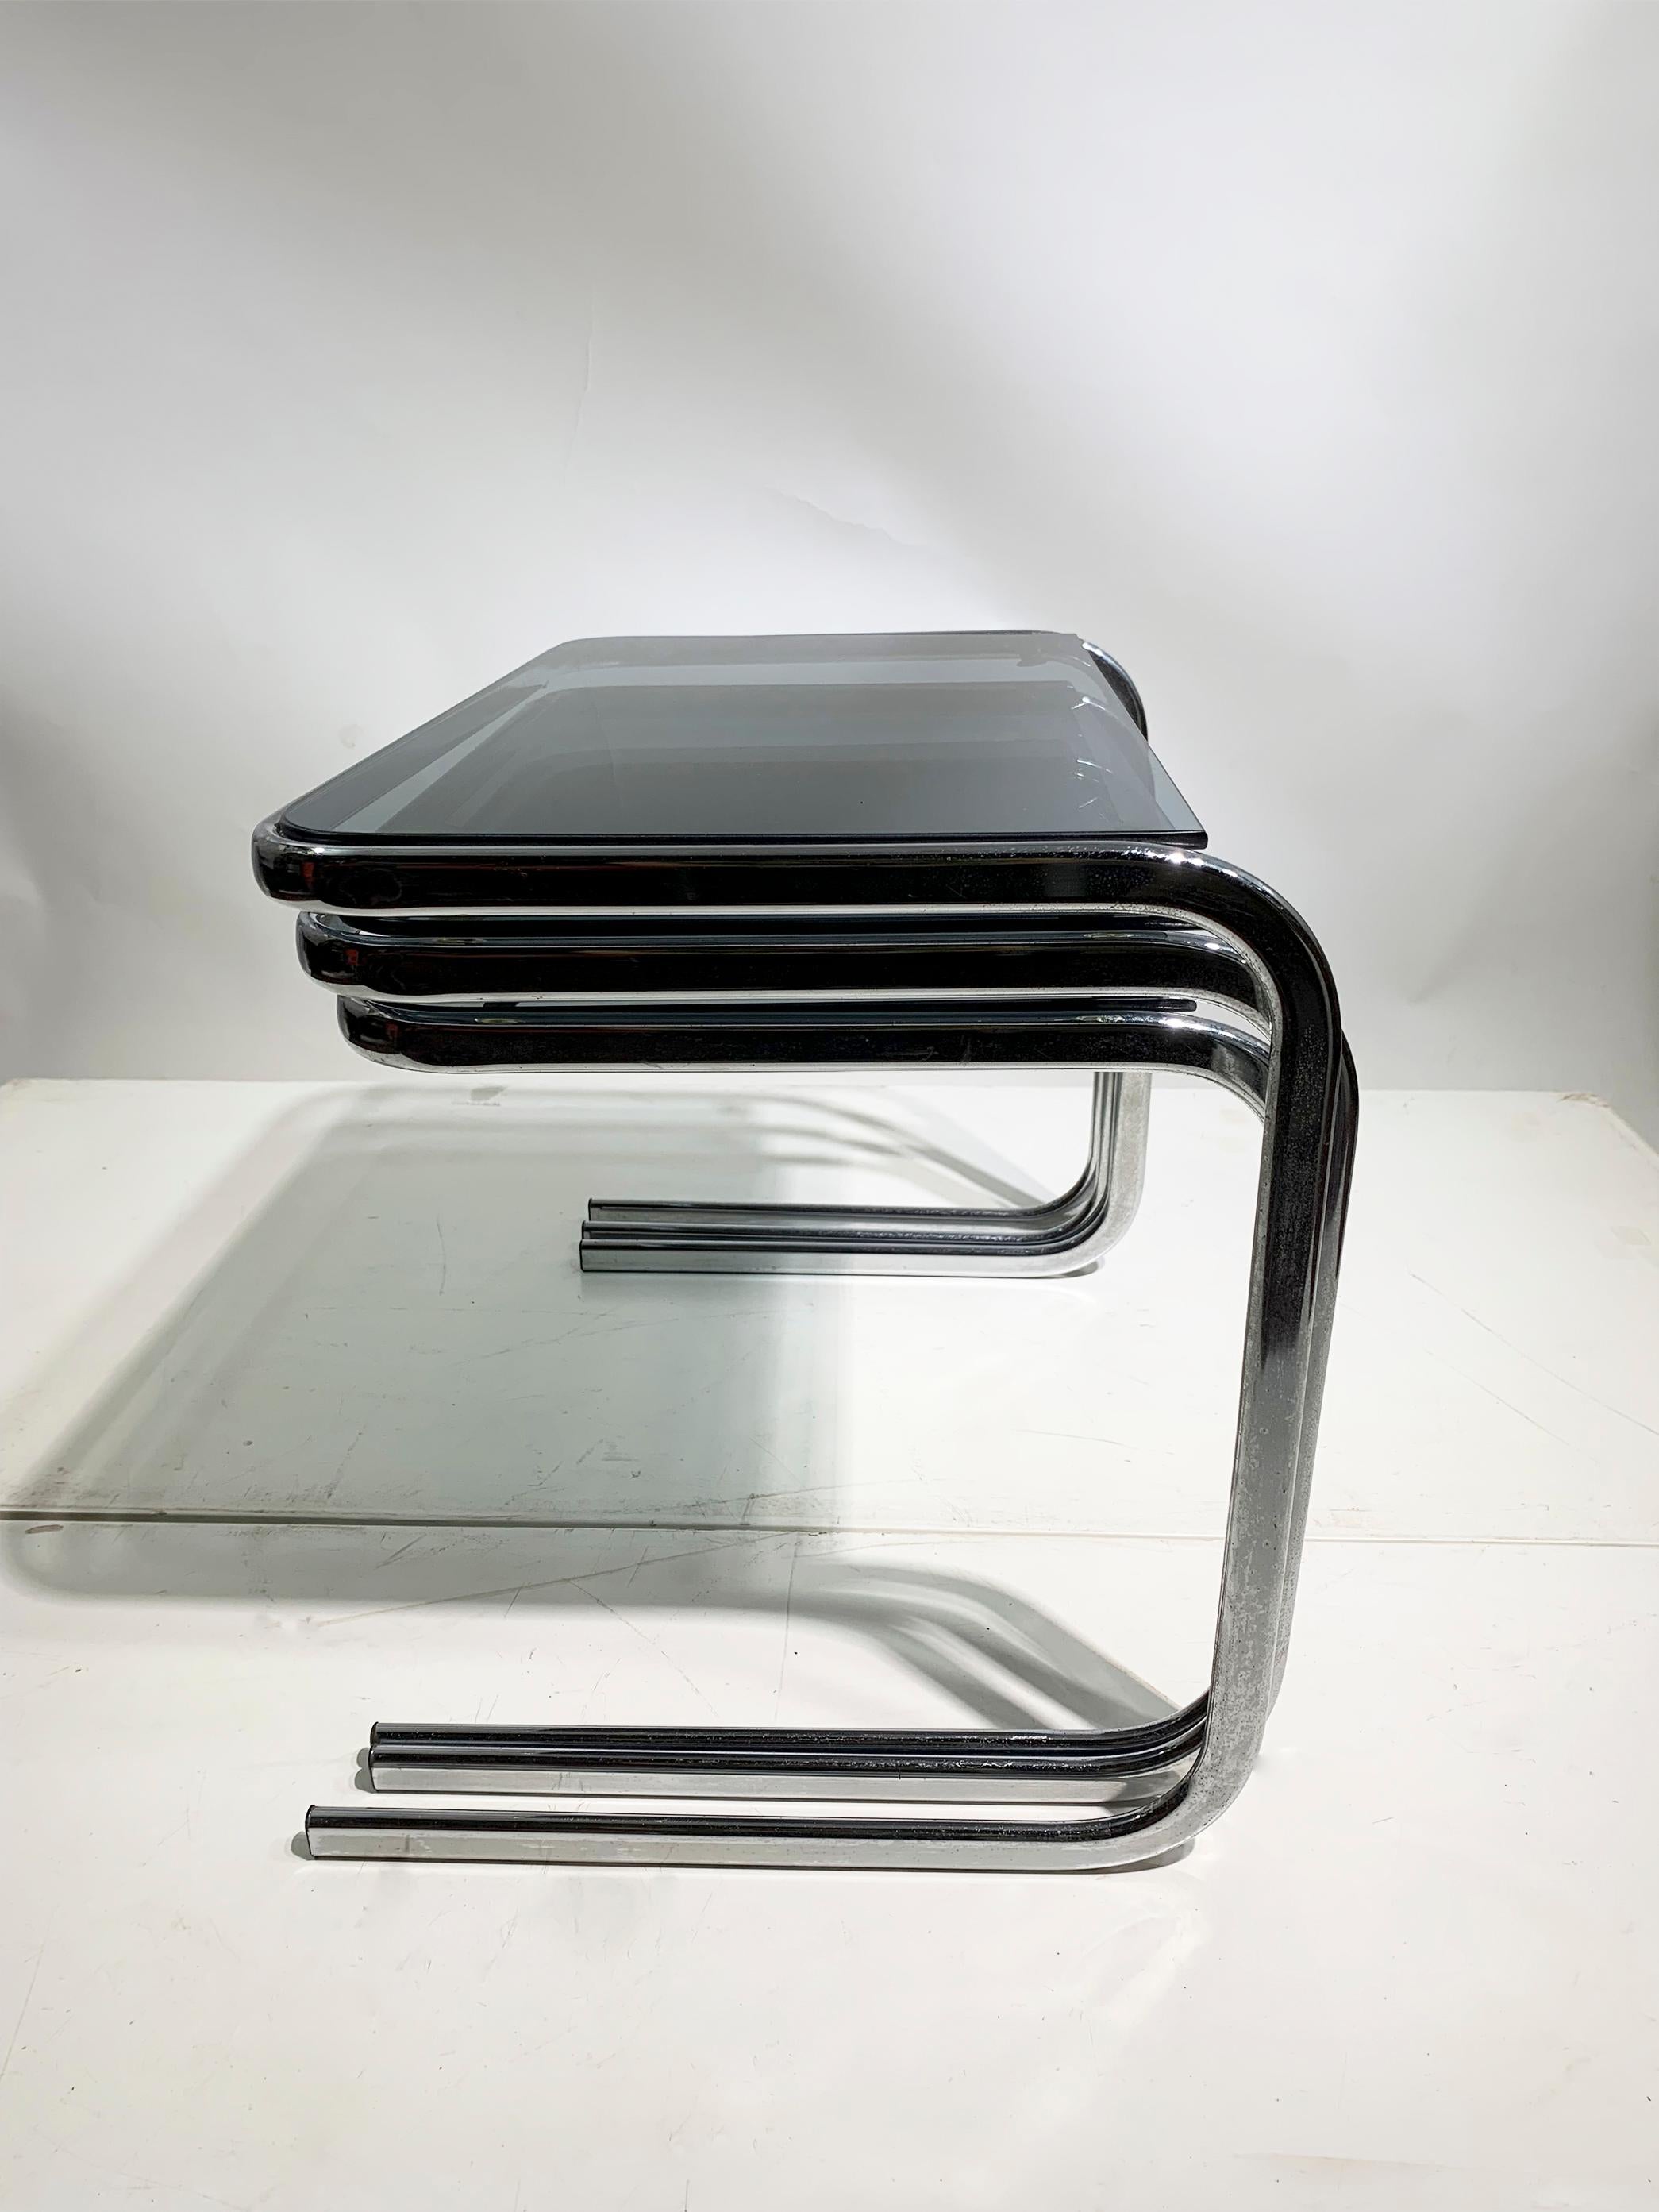 A sophisticated set of nested tables from the late 1970s, showcasing Italian craftsmanship in chrome and smoked glass, exuding post-modern elegance. 
The cantilever design adds a touch of luxury and modernity. 
The smoked green glass is expertly